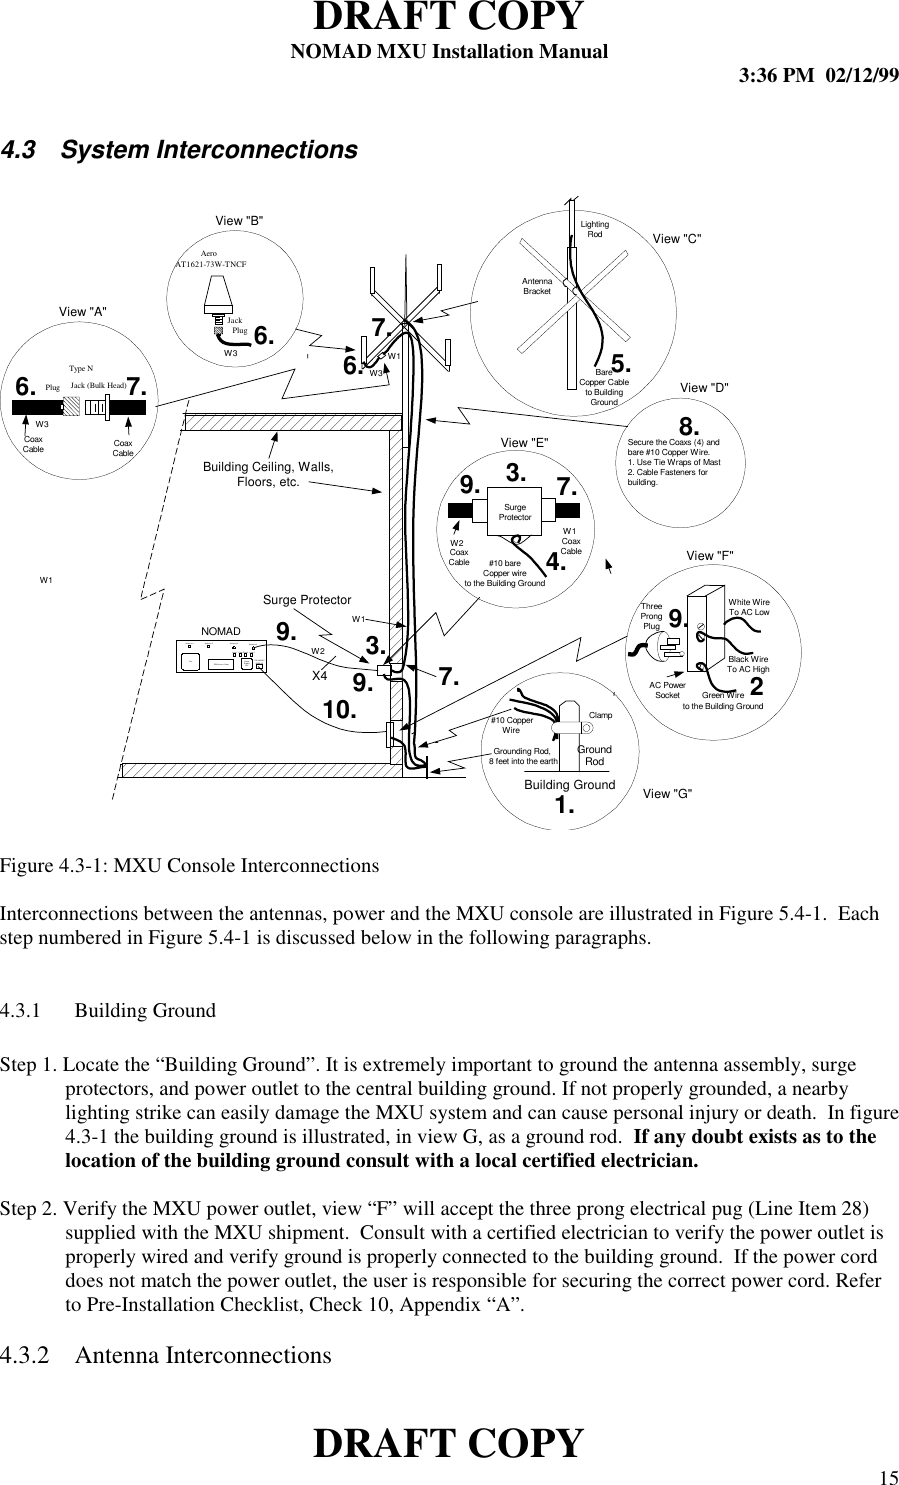 DRAFT COPYNOMAD MXU Installation Manual 3:36 PM  02/12/99DRAFT COPY 154.3 System InterconnectionsFigure 4.3-1: MXU Console InterconnectionsInterconnections between the antennas, power and the MXU console are illustrated in Figure 5.4-1.  Eachstep numbered in Figure 5.4-1 is discussed below in the following paragraphs.4.3.1 Building GroundStep 1. Locate the “Building Ground”. It is extremely important to ground the antenna assembly, surgeprotectors, and power outlet to the central building ground. If not properly grounded, a nearbylighting strike can easily damage the MXU system and can cause personal injury or death.  In figure4.3-1 the building ground is illustrated, in view G, as a ground rod.  If any doubt exists as to thelocation of the building ground consult with a local certified electrician.Step 2. Verify the MXU power outlet, view “F” will accept the three prong electrical pug (Line Item 28)supplied with the MXU shipment.  Consult with a certified electrician to verify the power outlet isproperly wired and verify ground is properly connected to the building ground.  If the power corddoes not match the power outlet, the user is responsible for securing the correct power cord. Referto Pre-Installation Checklist, Check 10, Appendix “A”.4.3.2 Antenna InterconnectionsFan PowerSupplyFanSIM Access CoverAntenna 1 Antenna 2 Antenna 3 A ntenna 4110-230VAC50/60 HZLine 1 Line 2Line 3 Line 4LightingRodGroundRodAC PowerSocketNOMADGrounding Rod, 8 feet into the earth #10 CopperWireClampGreen Wireto the Building GroundWhite WireTo AC LowBlack WireTo AC HighThreeProngPlug#10 bareCopper wireto the Building GroundCoaxCableCoaxCableCoaxCable CoaxCableBareCopper Cableto BuildingGroundAntennaBracketBuilding Ceiling, Walls,Floors, etc.Building GroundSecure the Coaxs (4) andbare #10 Copper W ire.1. Use Tie Wraps of Mast2. Cable Fasteners forbuilding.3.25.6.1.SurgeProtector7.View &quot;A&quot;View &quot;B&quot;View &quot;C&quot;View &quot;D&quot;View &quot;E&quot;View &quot;F&quot;8.9. 9.10.4.6.7.7.X47.3.9.9.PlugType NJack (Bulk Head)Aero AT1621-73W-TNCFPlugJackView &quot;G&quot;6.Surge ProtectorW3W1W2W3W3W1W1W2W1